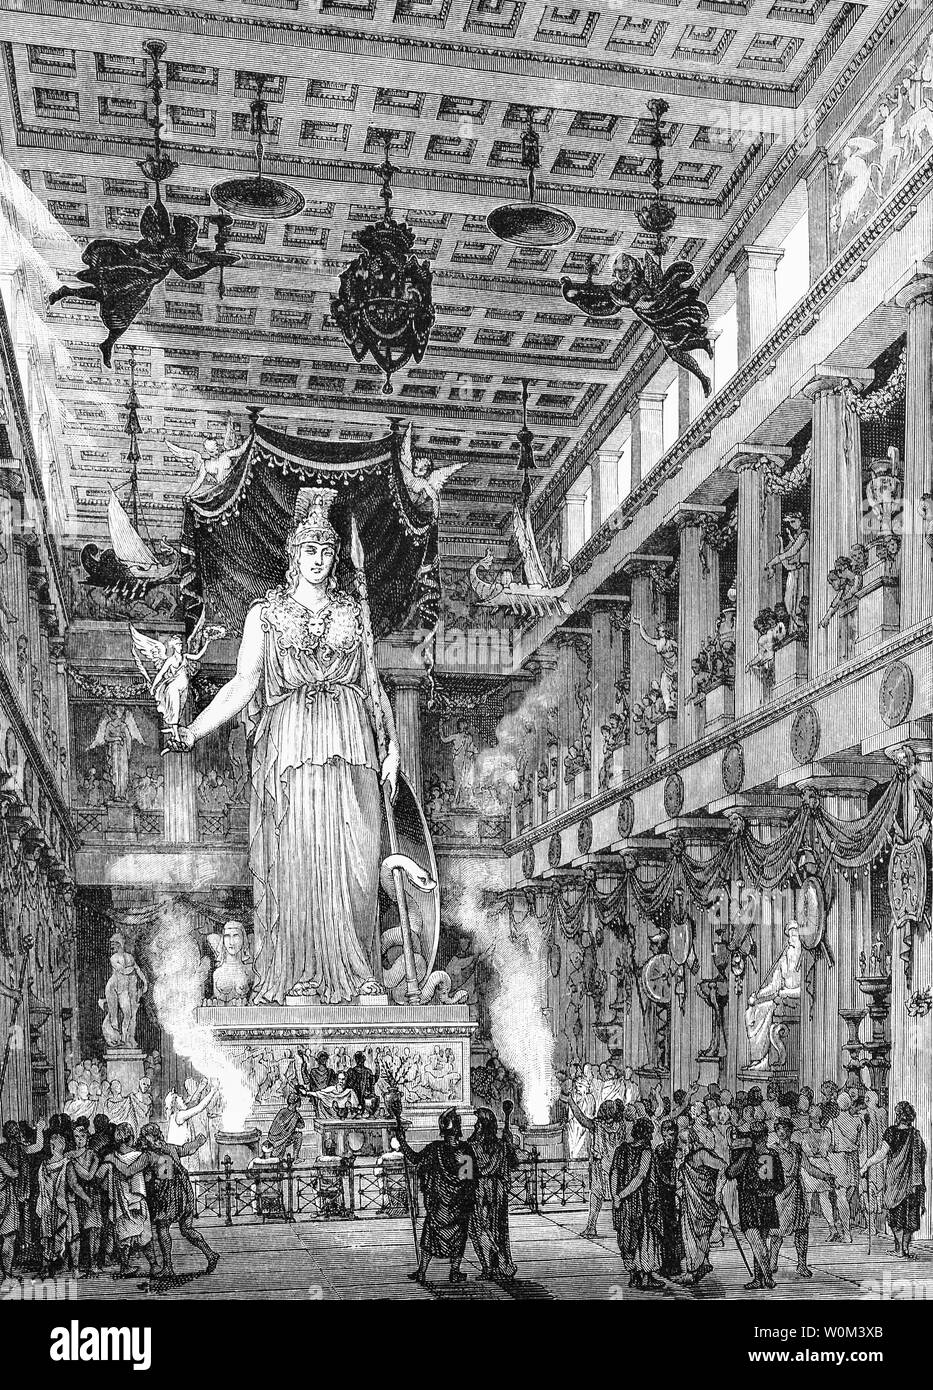 A reconstruction of the interior of the Parthenon, a former temple on the Acropolis, Athens, Greece, dedicated to the goddess Athena, patron saint of Athenians. Completed in 438 BC, decoration of the building continued until 432 BC. It is considered to be the zenith of the Doric order with its decorative sculptures considered some of the high points of Greek art. To the Athenians, the Parthenon and other Periclean monuments of the Acropolis were seen fundamentally as a celebration of Hellenic victory over the Persian invaders and as a thanksgiving to the gods for that victory. Stock Photo